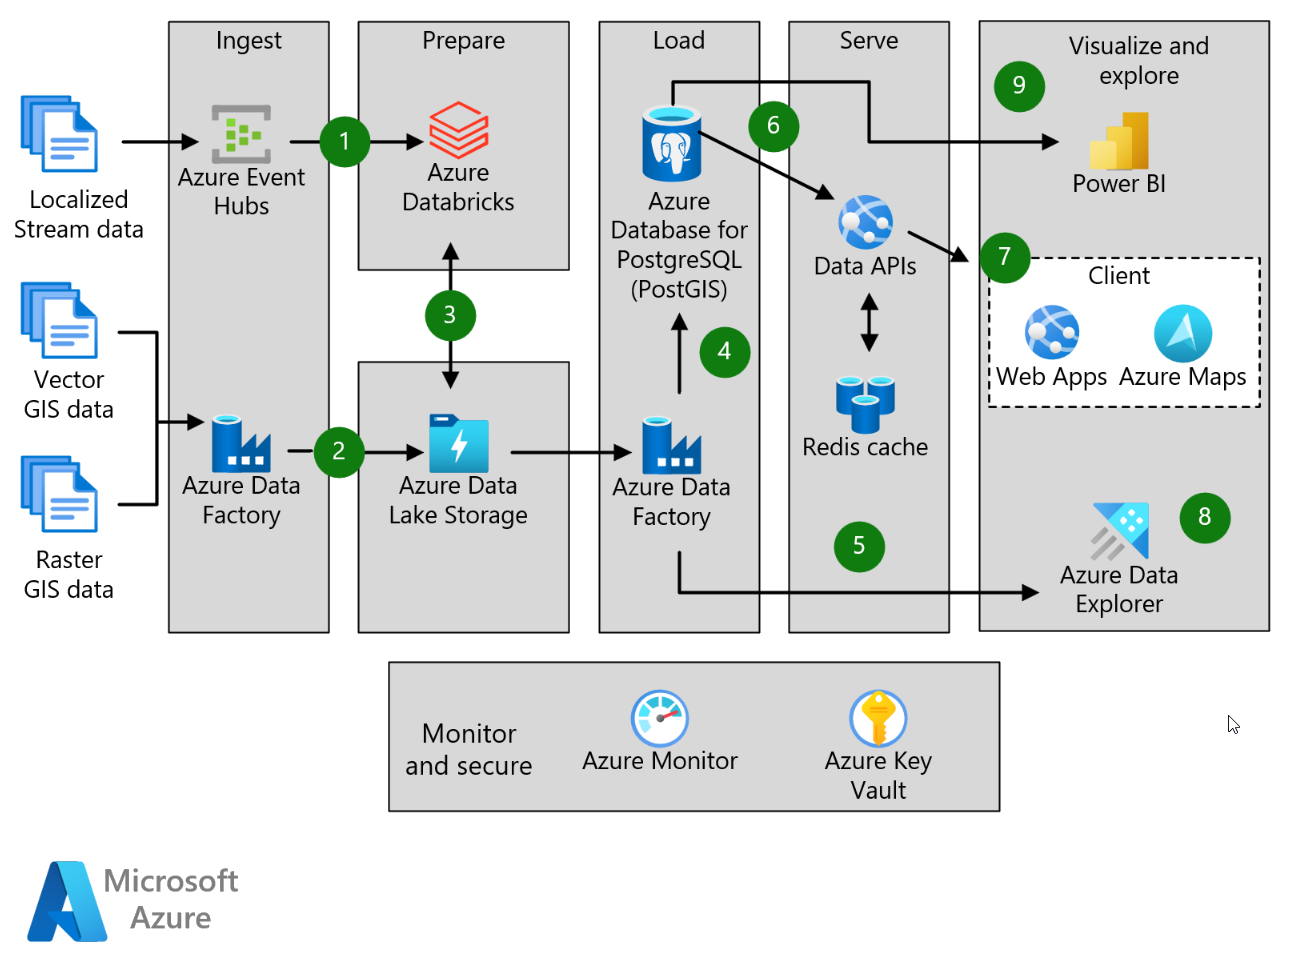 Architecture diagram showing how geospatial data flows through an Azure system. Various components receive, process, store, analyze, and publish the data.